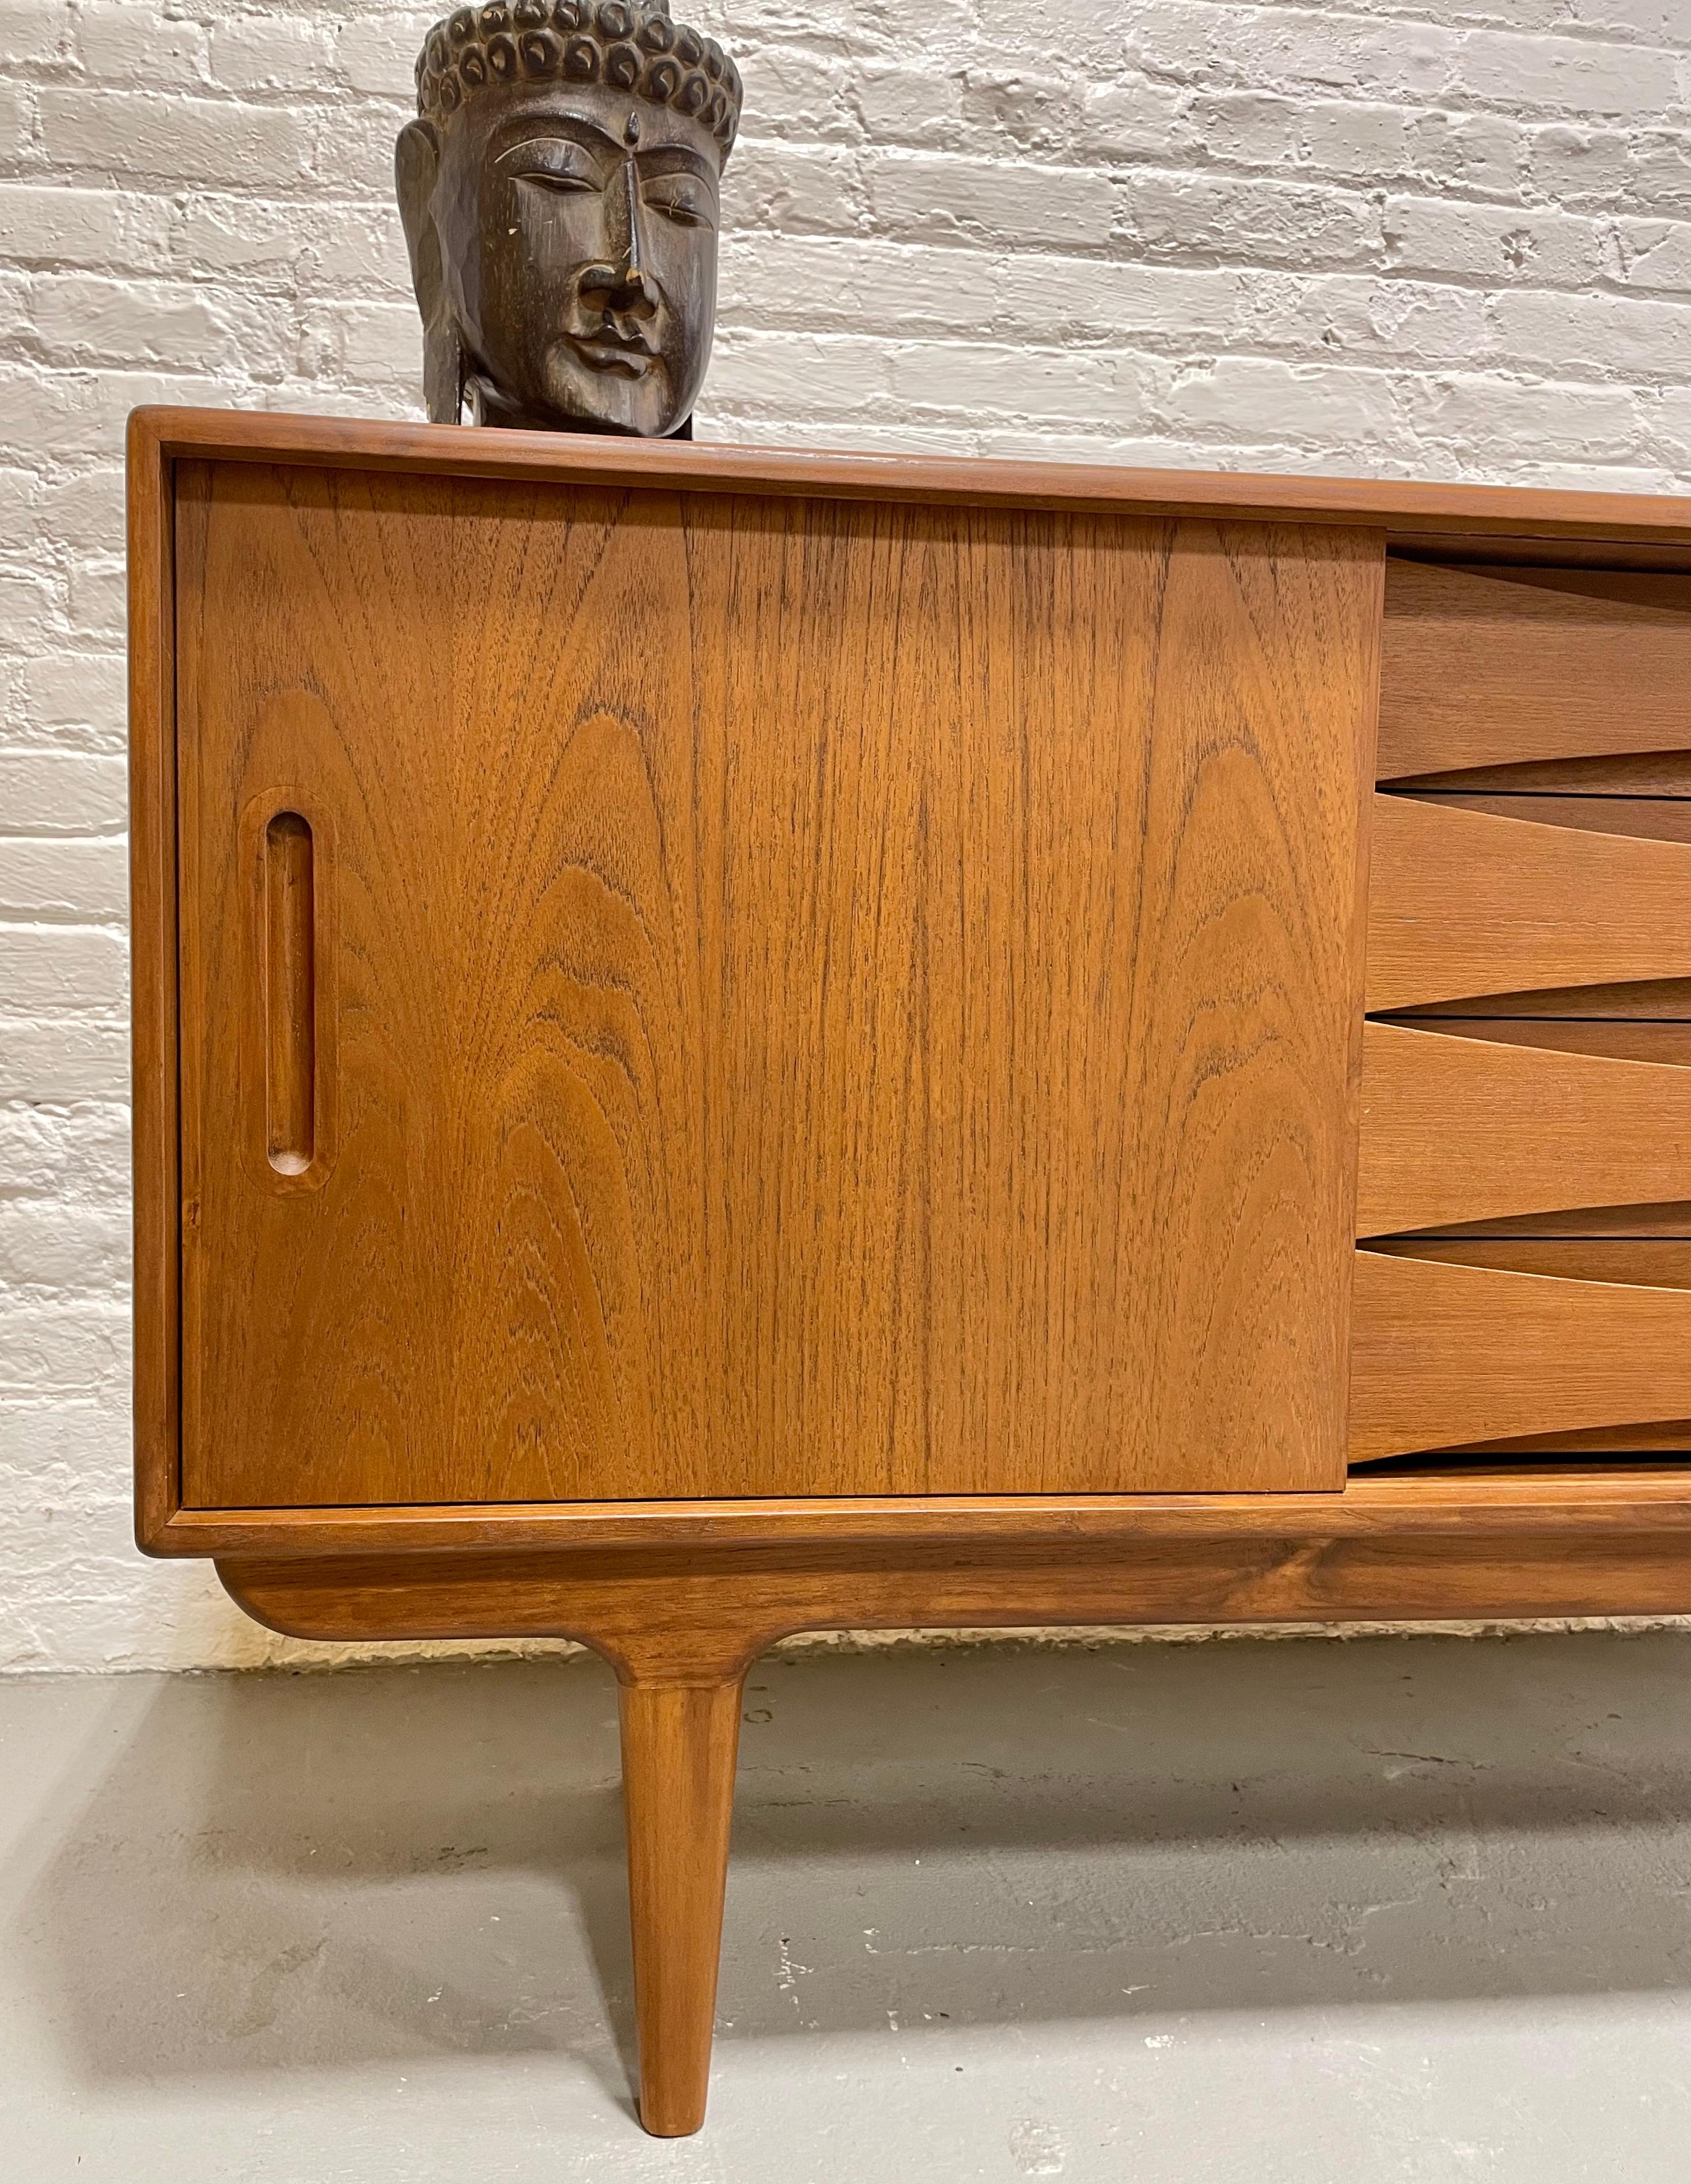 Wood Classic Mid-Century Modern Styled Credenza / Media Stand For Sale